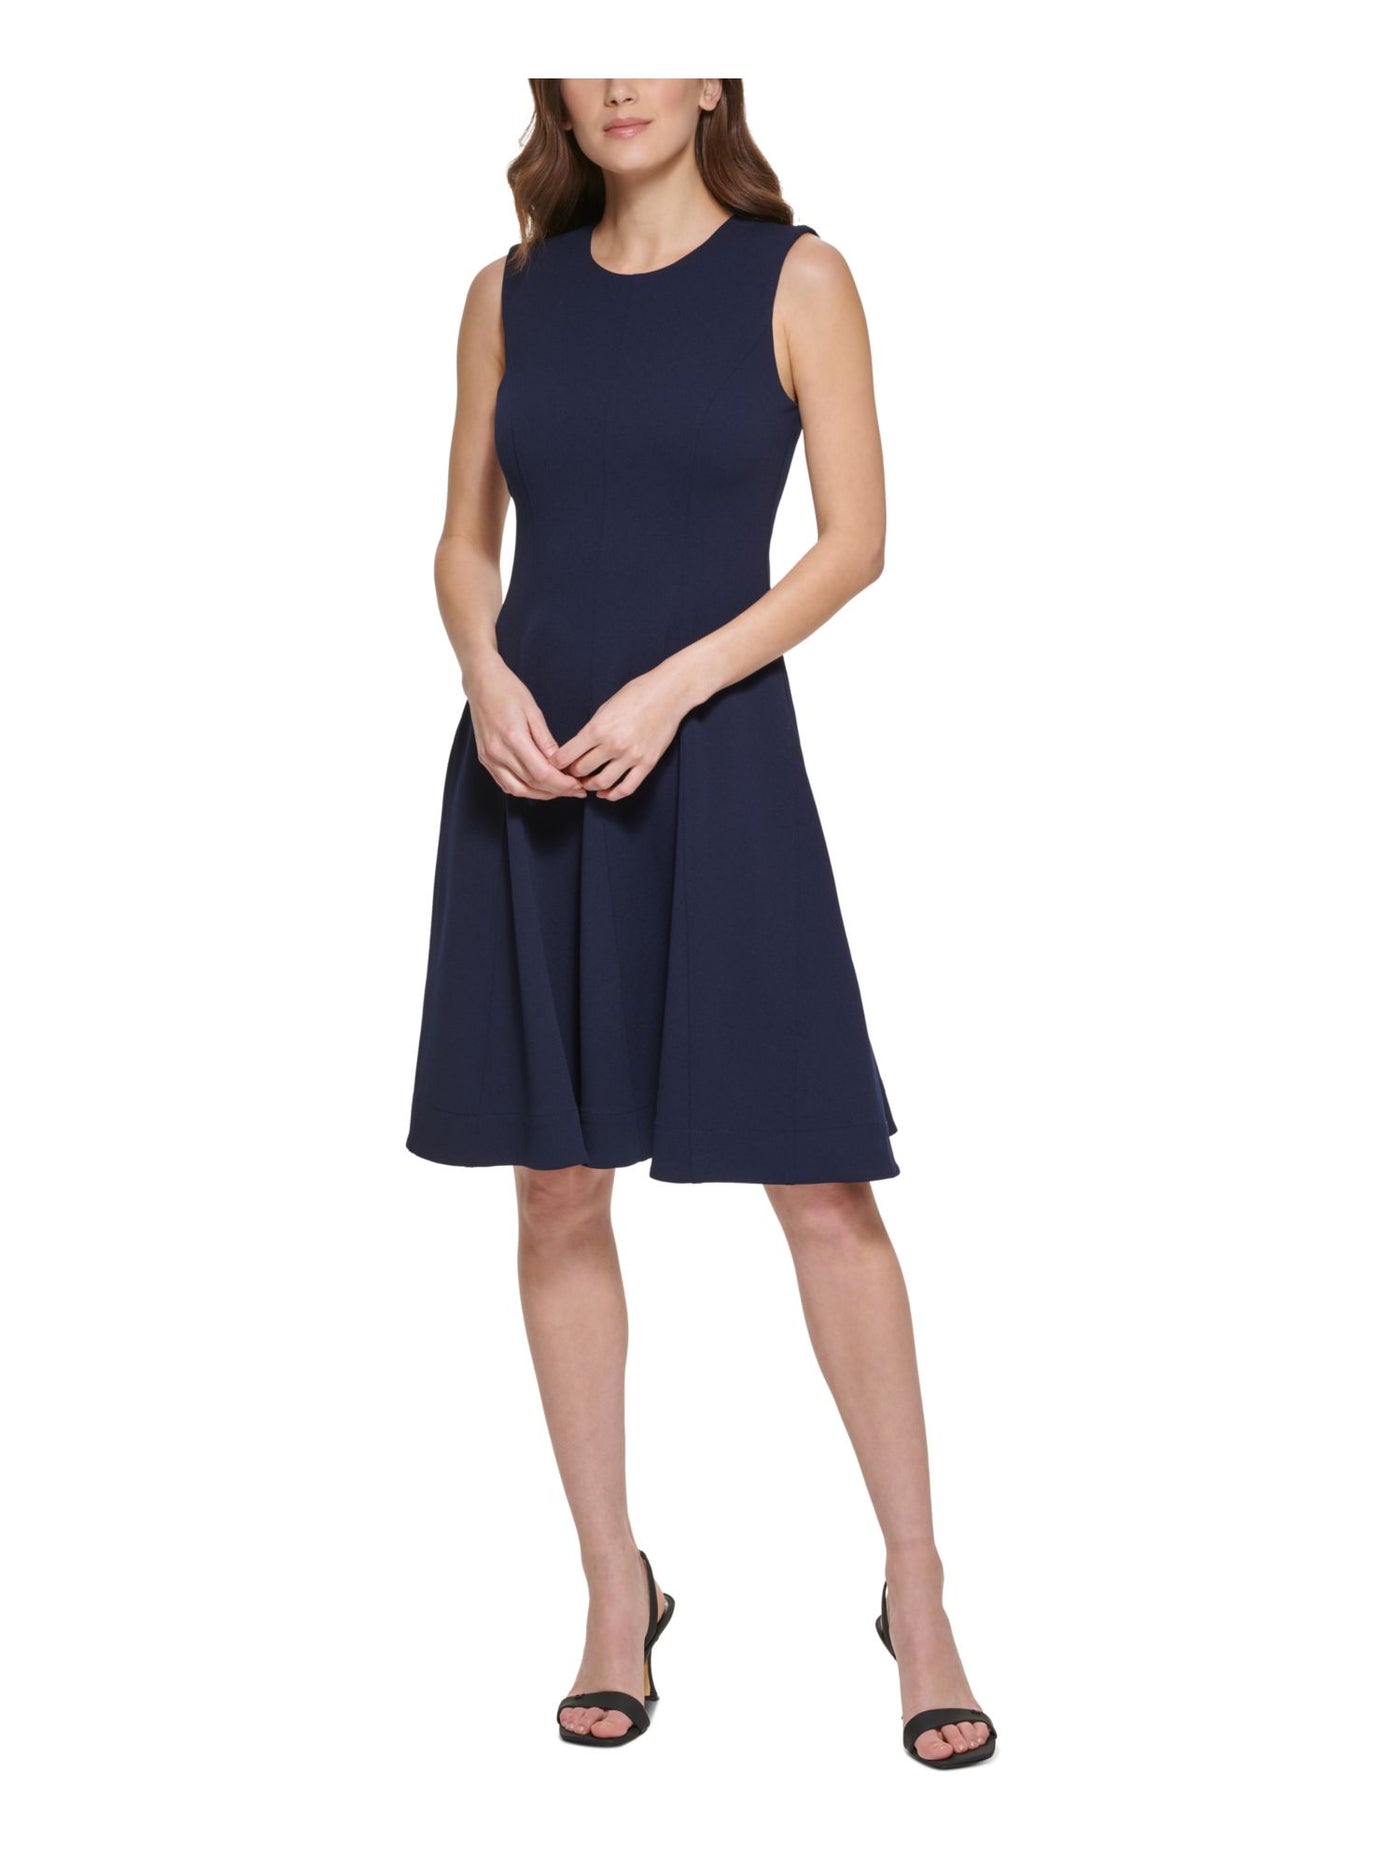 CALVIN KLEIN Womens Navy Zippered Textured Sleeveless Jewel Neck Above The Knee Wear To Work Fit + Flare Dress 2